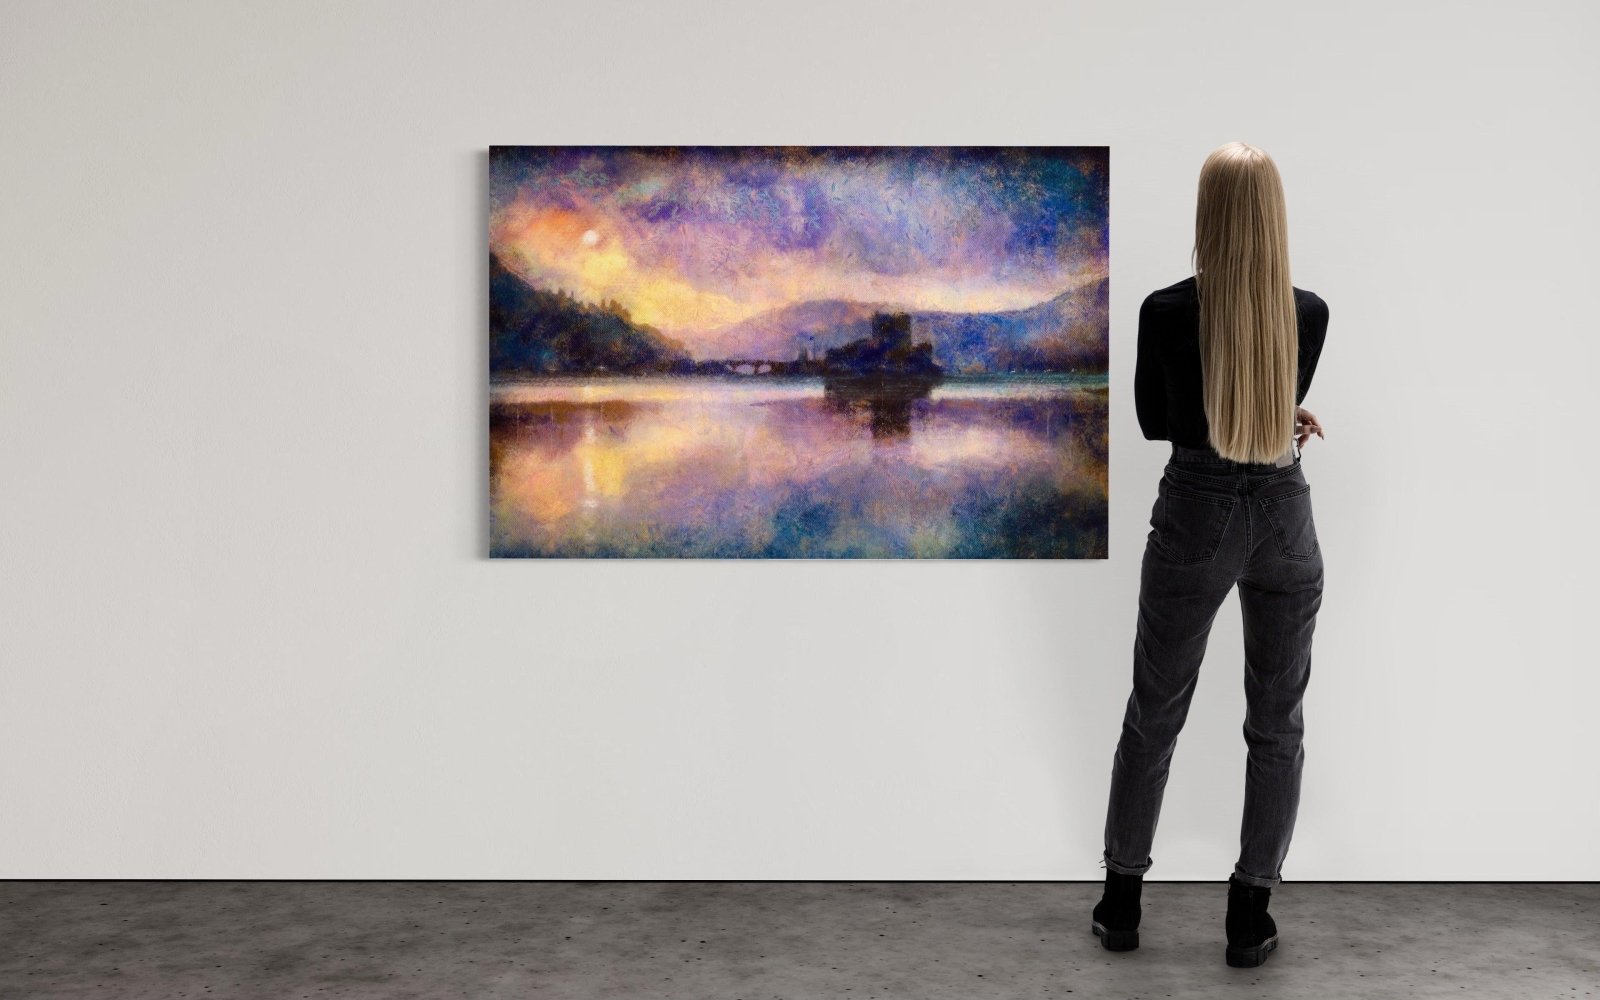 Eilean Donan Castle Moonlight 60x40 inch Stretched Canvas Statement Wall Art-Statement Wall Art-Historic & Iconic Scotland Art Gallery-Paintings, Prints, Homeware, Art Gifts From Scotland By Scottish Artist Kevin Hunter